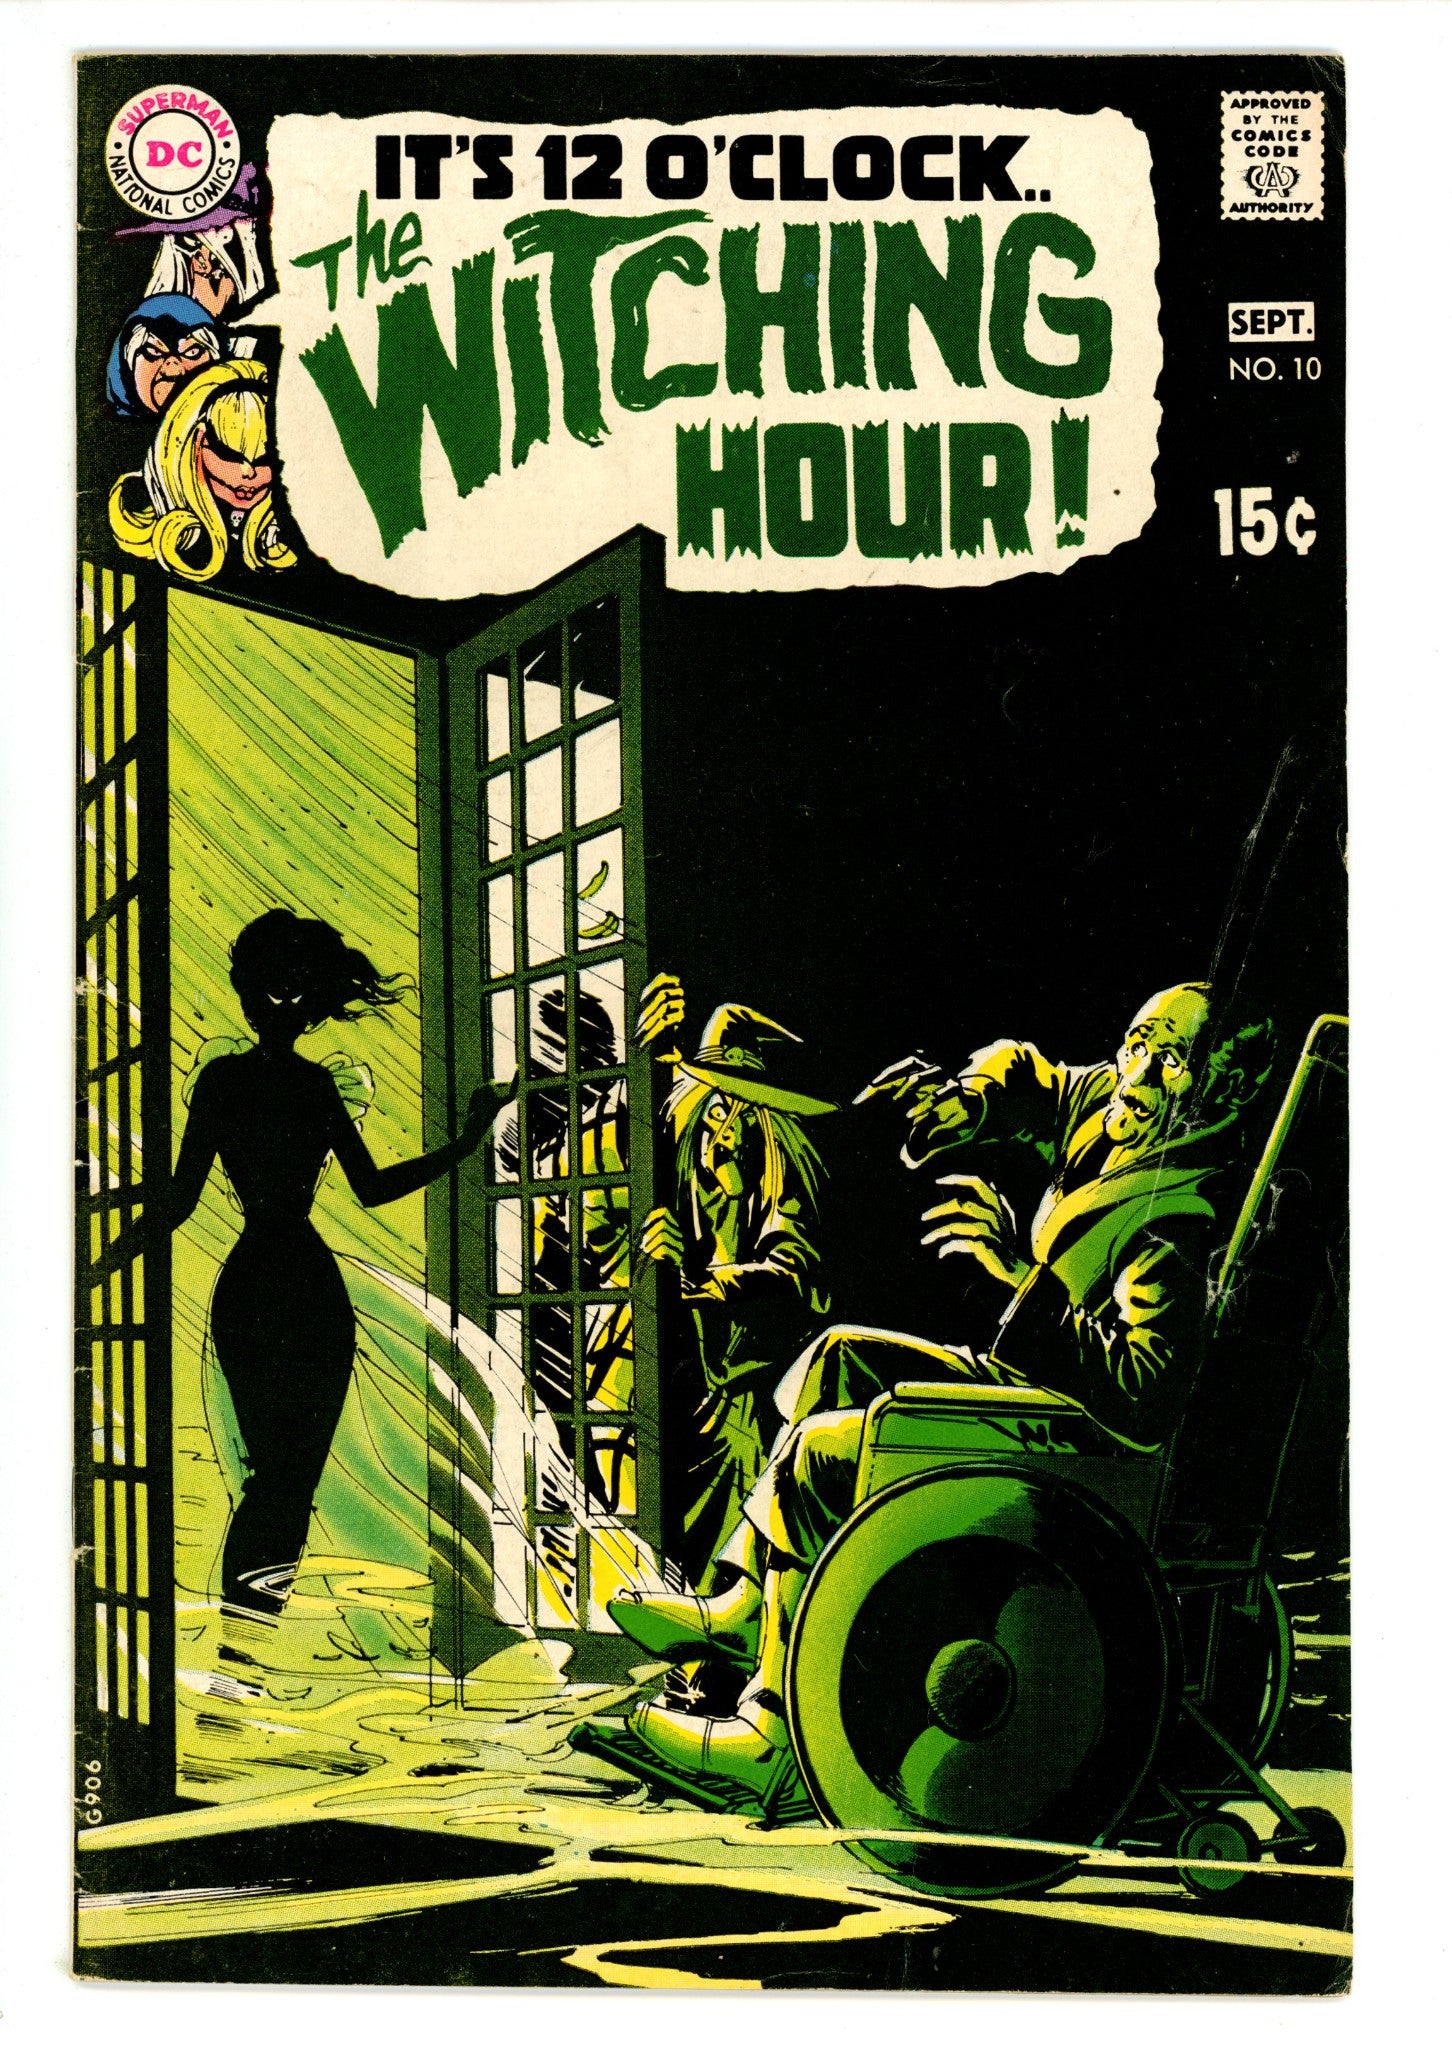 The Witching Hour Vol 1 10 VG+ (4.5) (1970) 